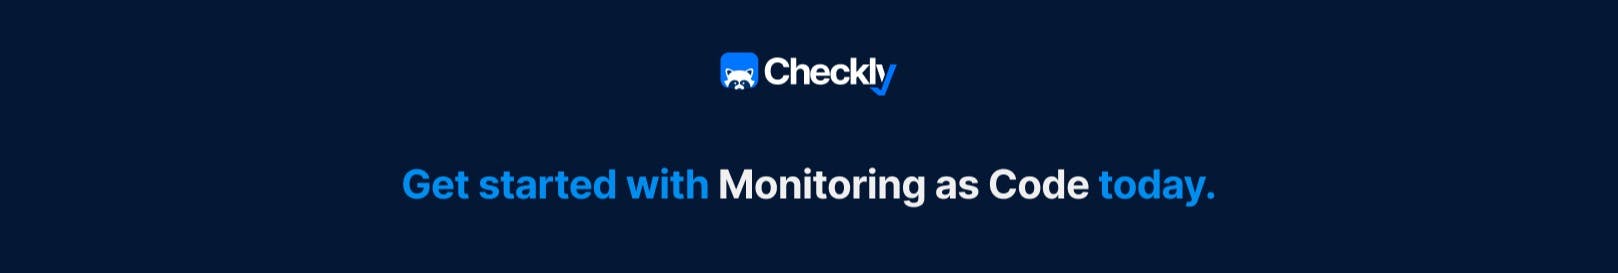 Get Started with Monitoring as Code